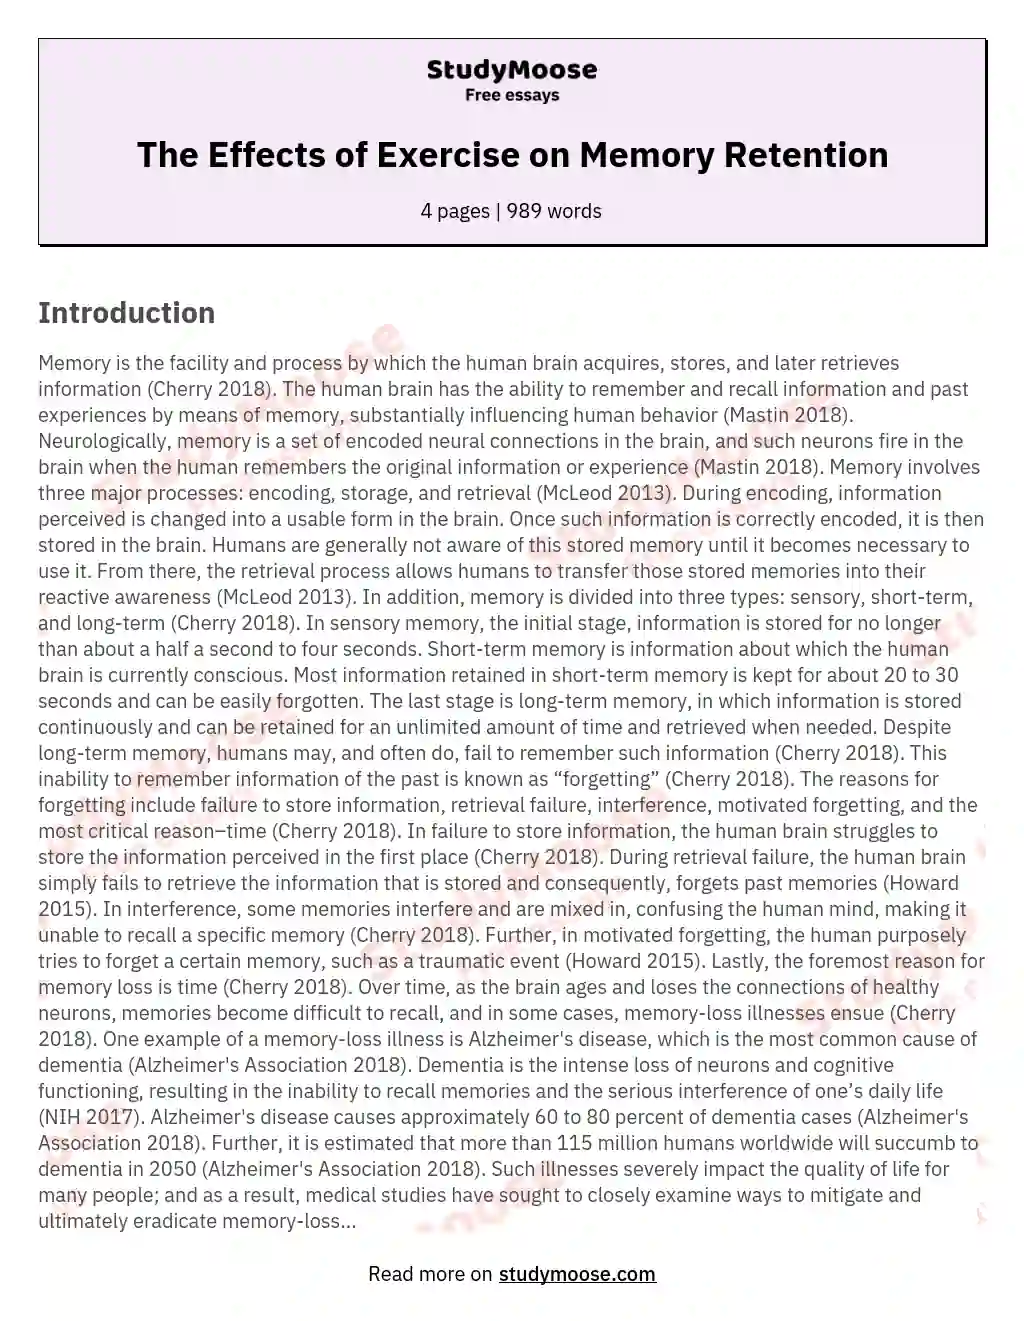 The Effects of Exercise on Memory Retention essay